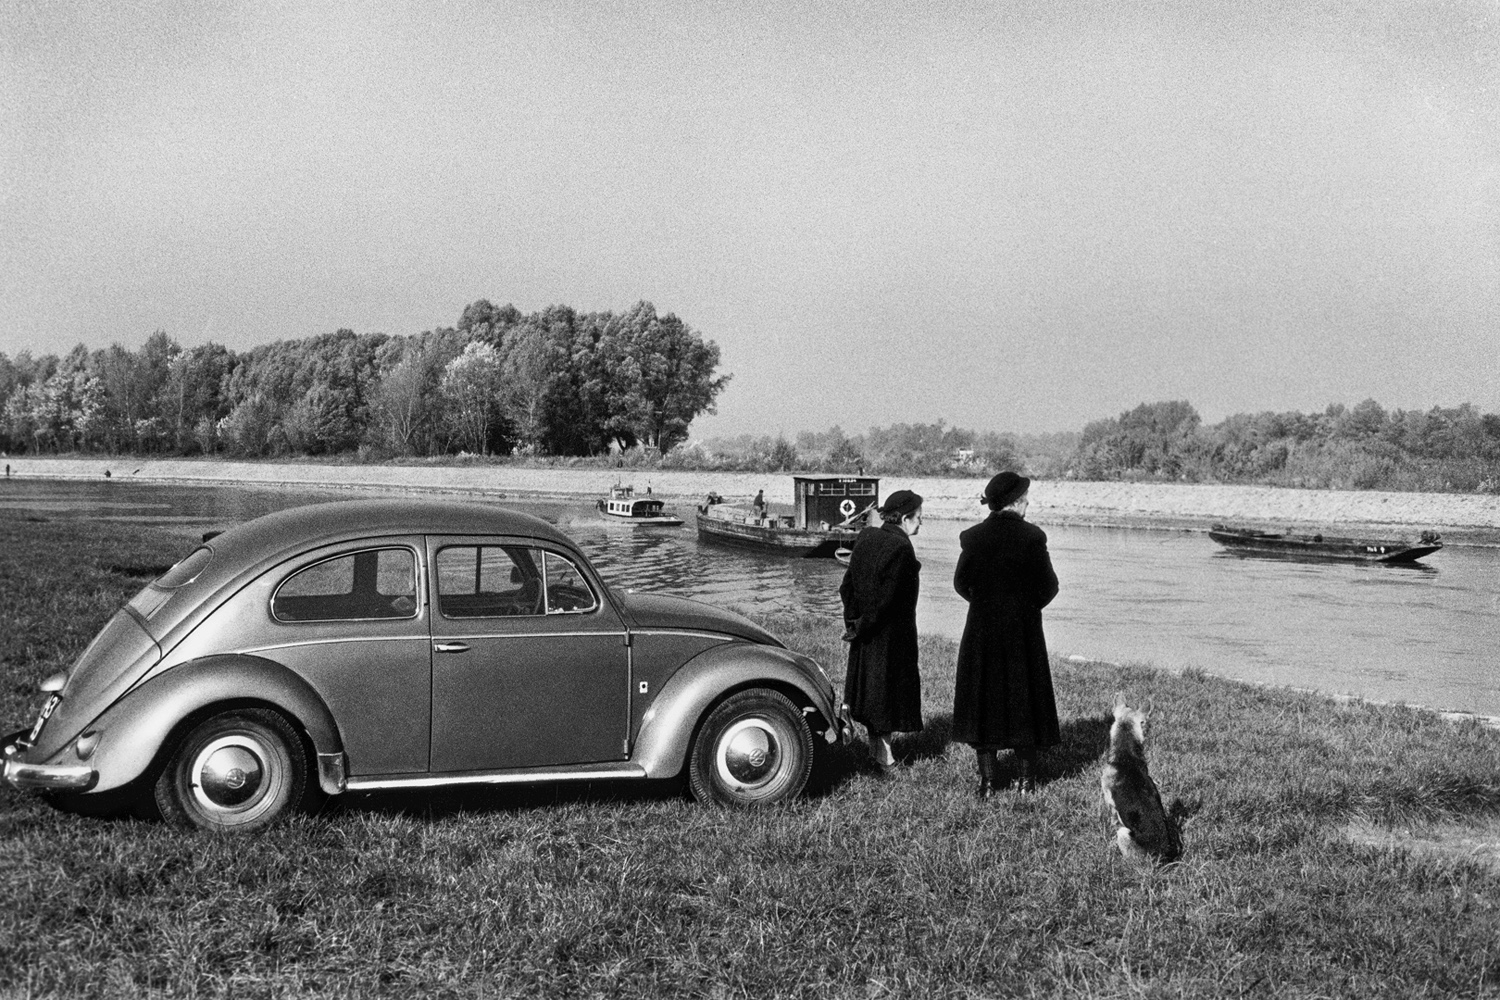 The following images were taken by Inge Morath between 1958 and 2001, and are accompanied by excerpts from personal diaries she kept to chronicle her many visits to the Danube.